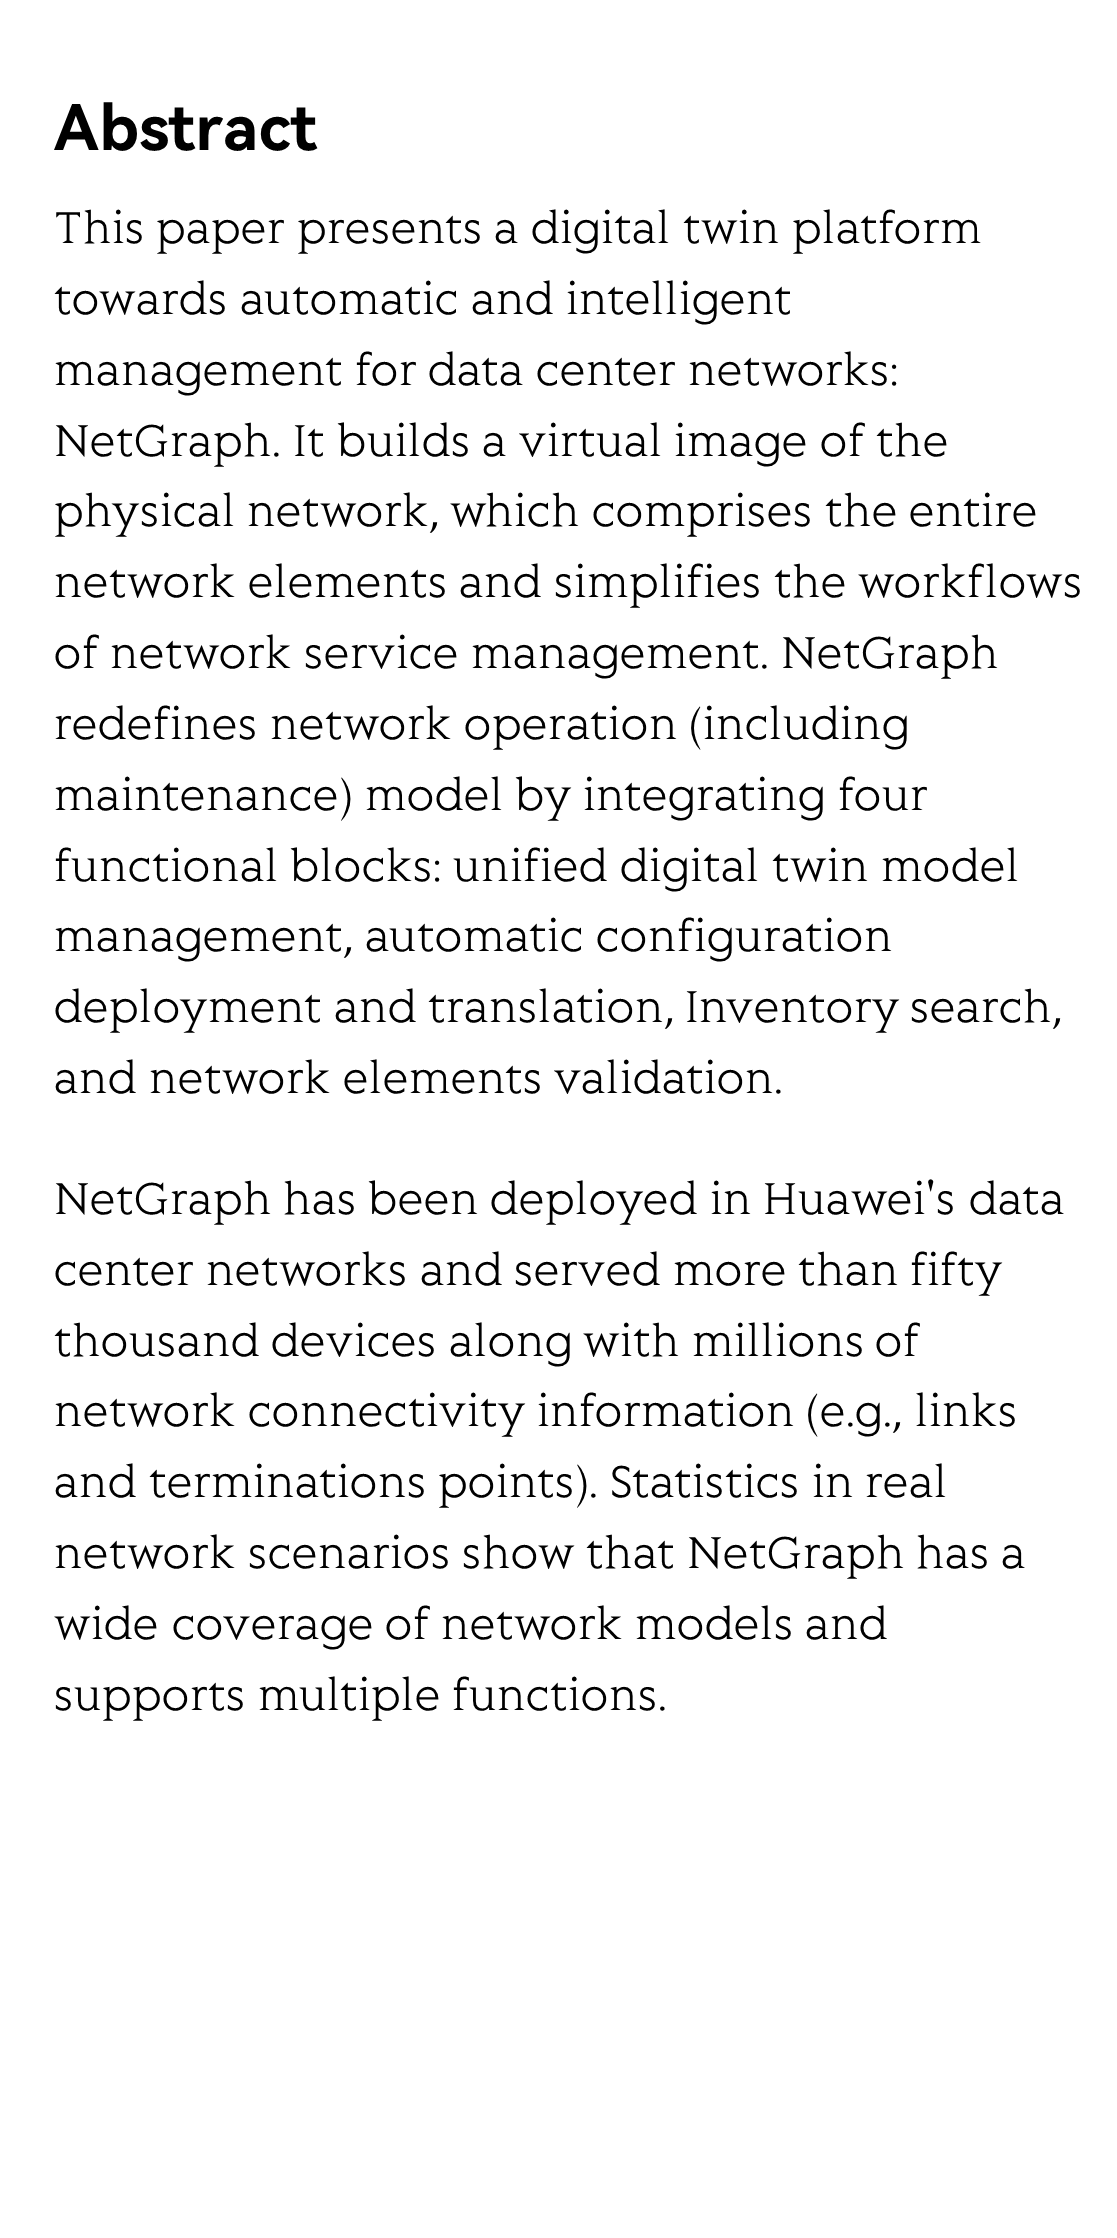 NAI'21: Proceedings of the ACM SIGCOMM 2021 Workshop on Network-Application Integration_2